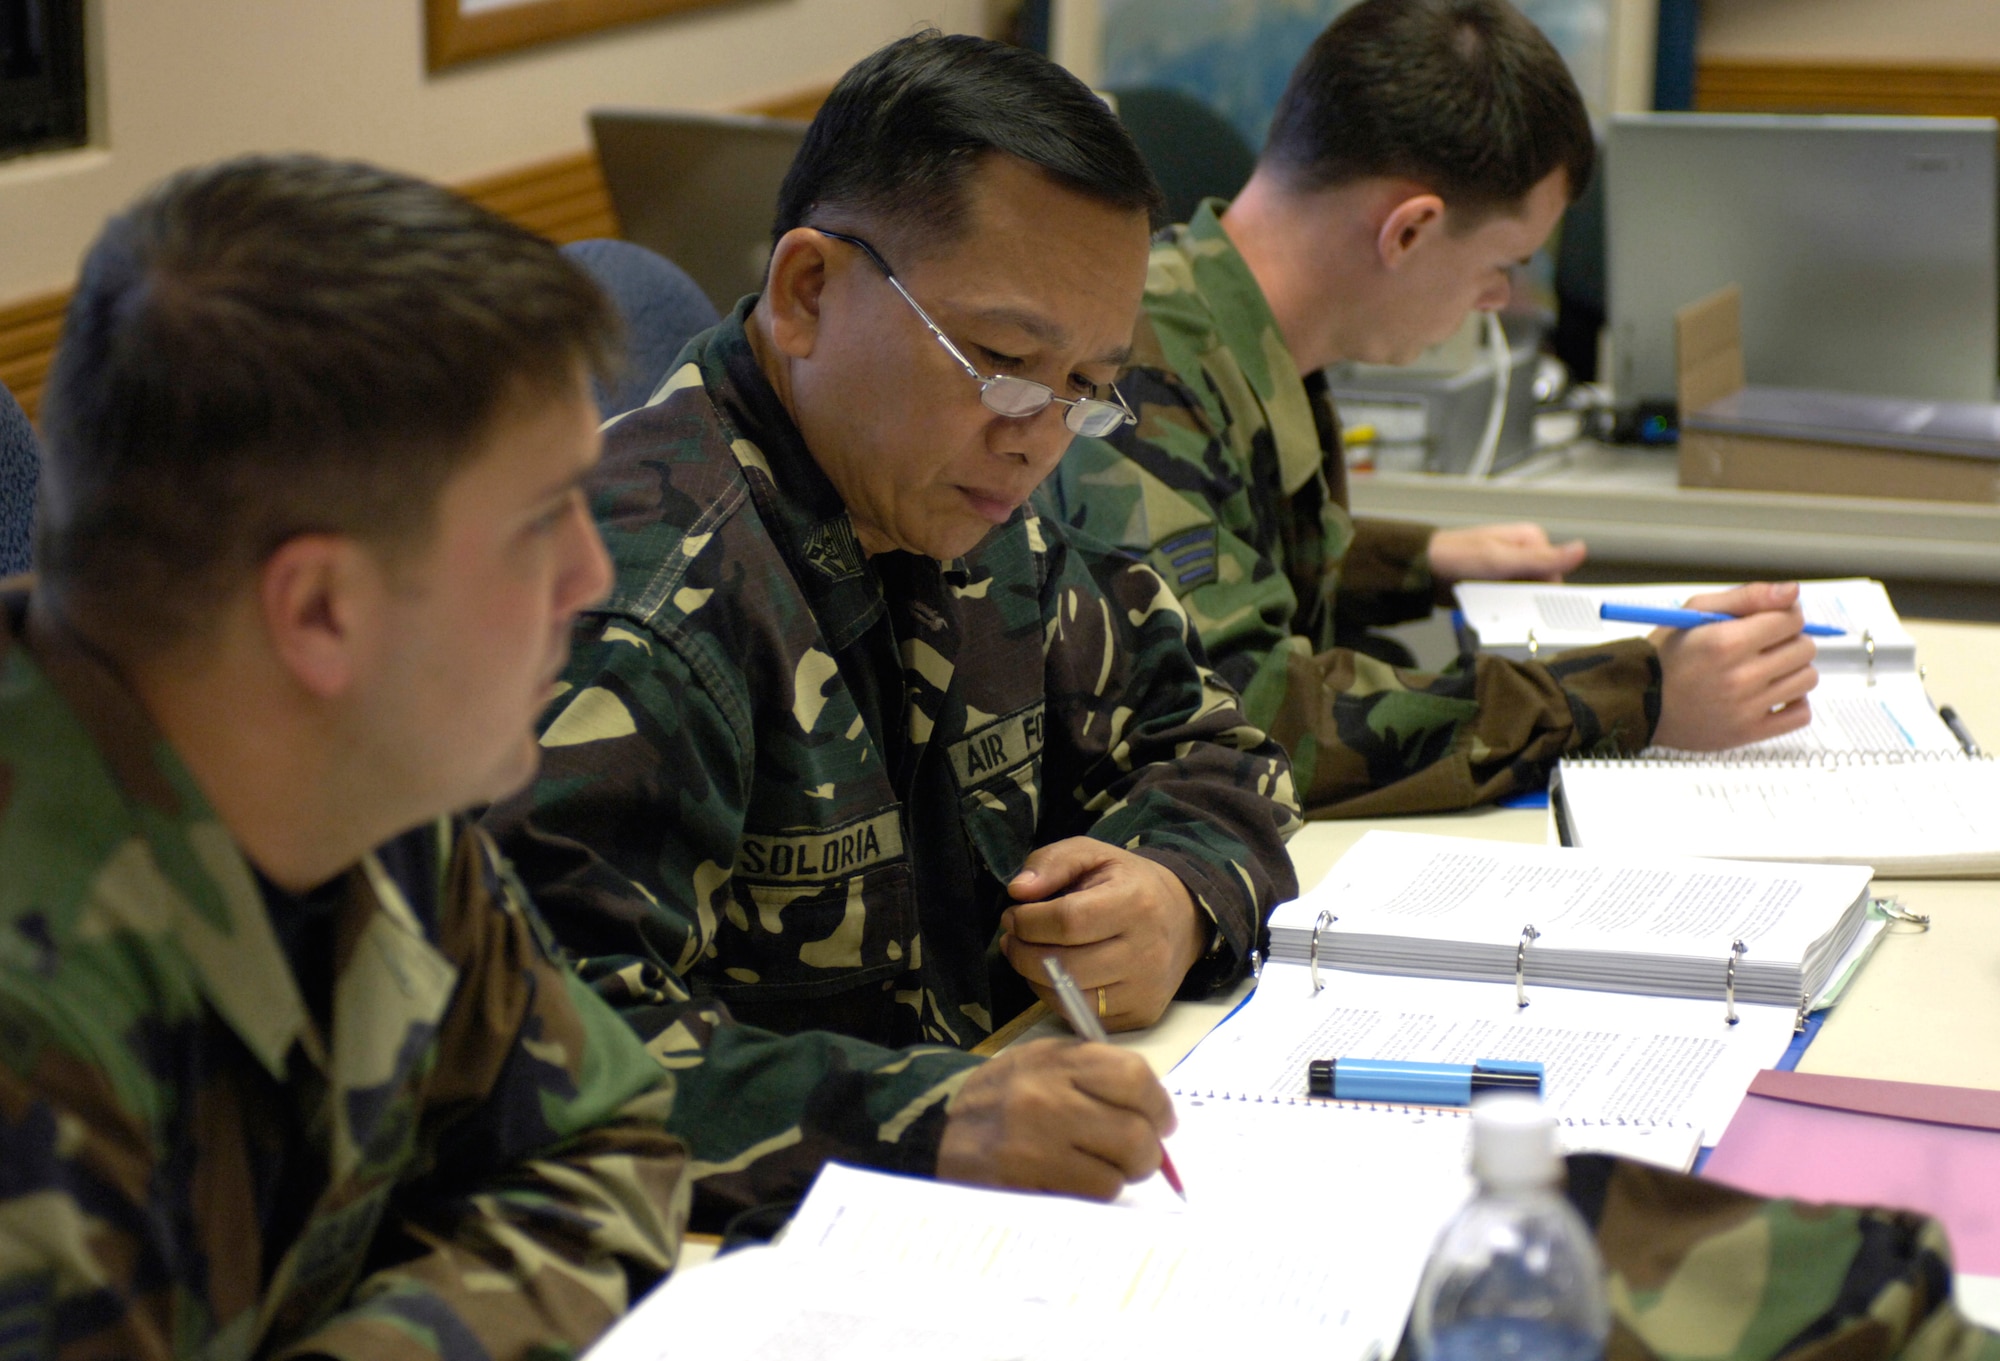 HICKAM AIR FORCE BASE, Hawaii -- Command Sgt. Maj. of the Philippine Air Force Cesar Soloria takes notes during Airman Leadership School class, Tuesday, March 7, 2006, at Hickam Air Force Base, Hawaii. The command sergeant major and four other students are the first Philippine Air Force Airmen to attend the class. They will take back the lessons learned and develop their own course within their air force.